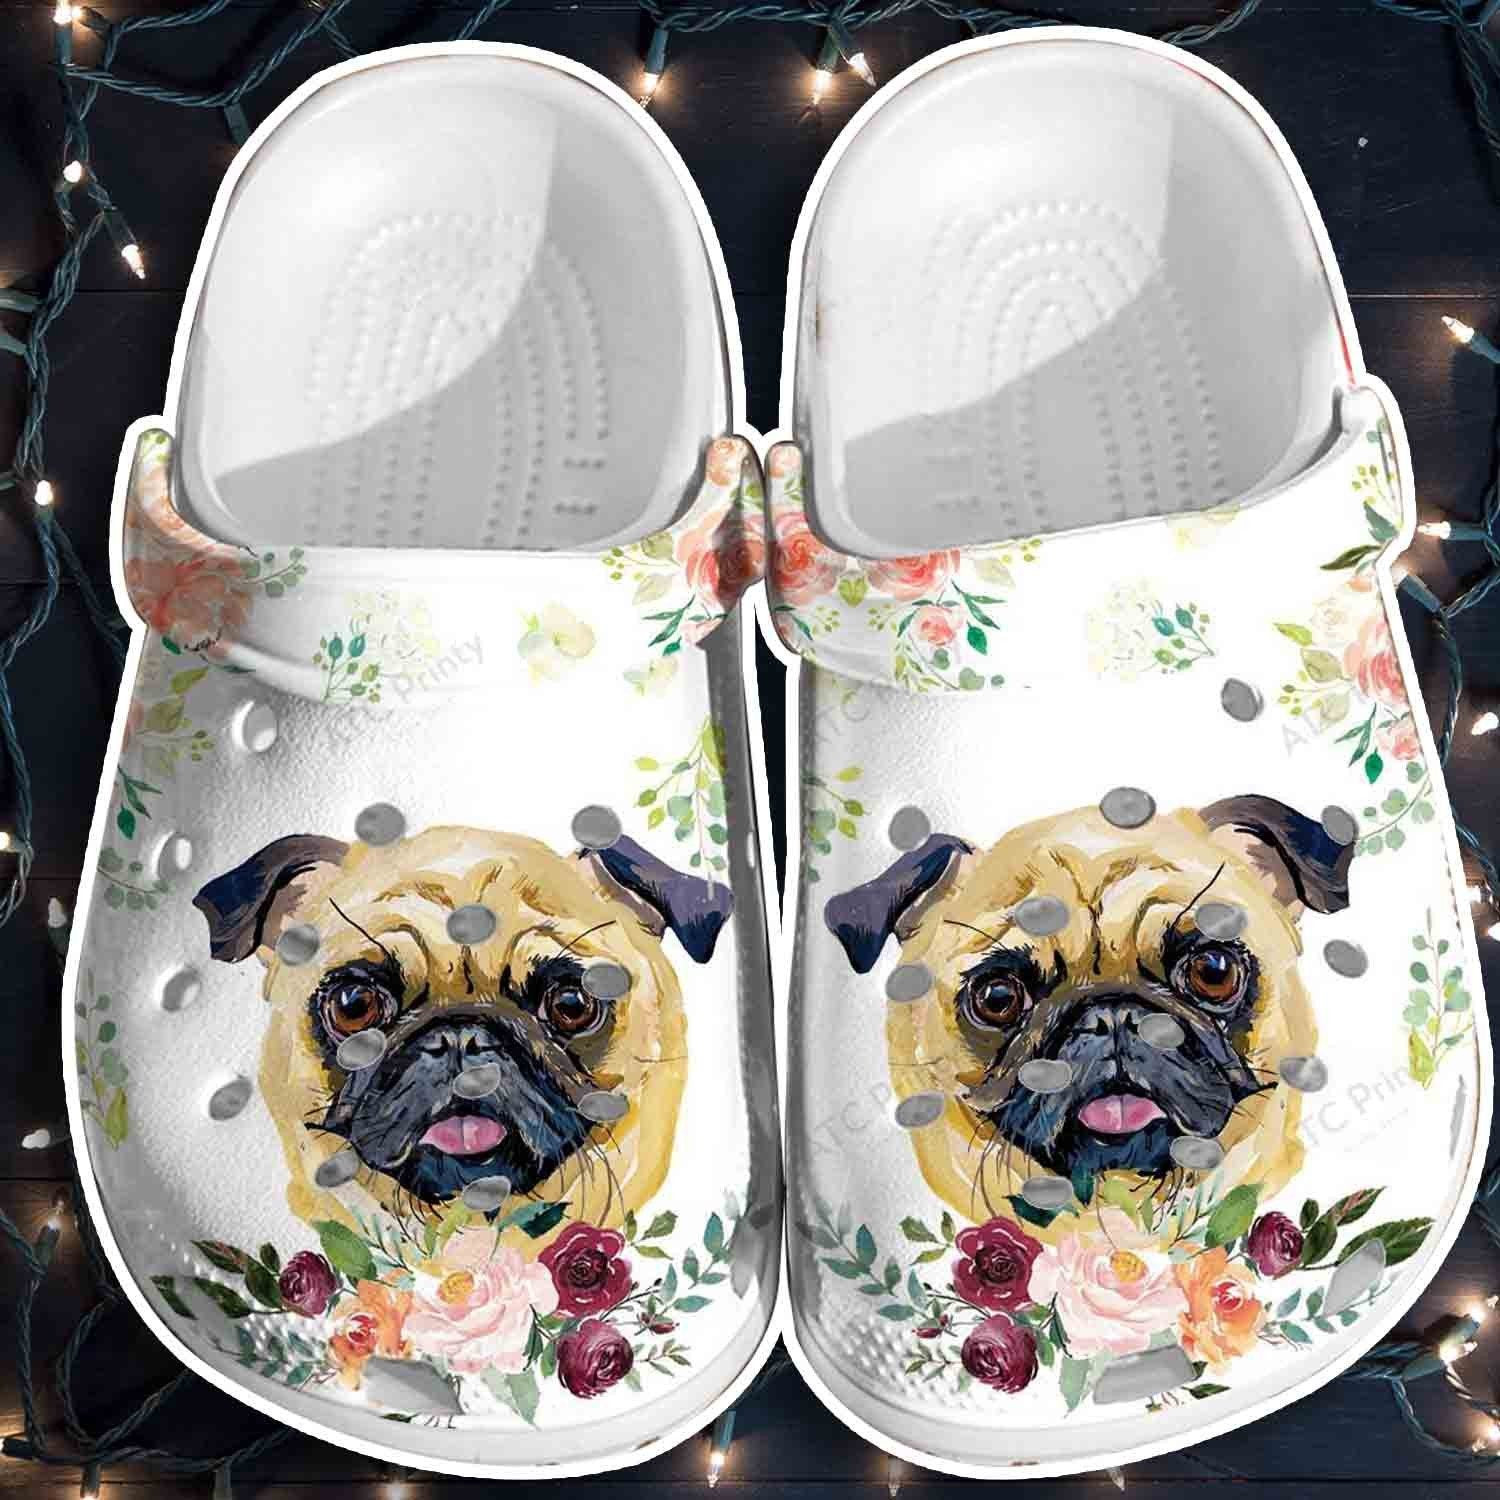 Adorable Pitbull Crocs Shoes Clogs For Mother Day - Roses Dog Custom Shoe Gifts For Mom Daughter